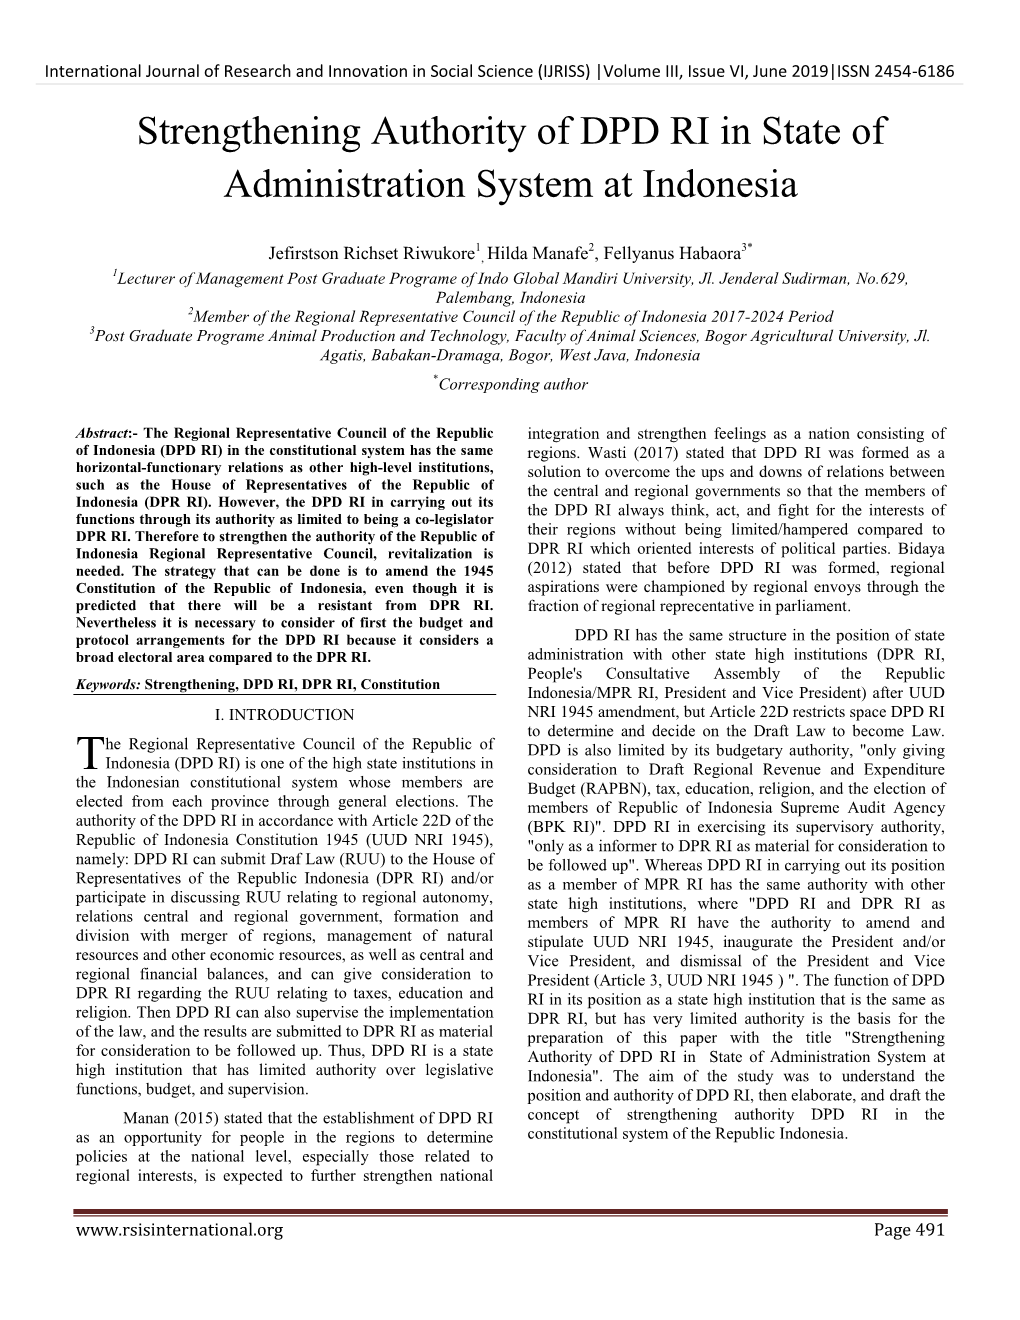 Strengthening Authority of DPD RI in State of Administration System at Indonesia